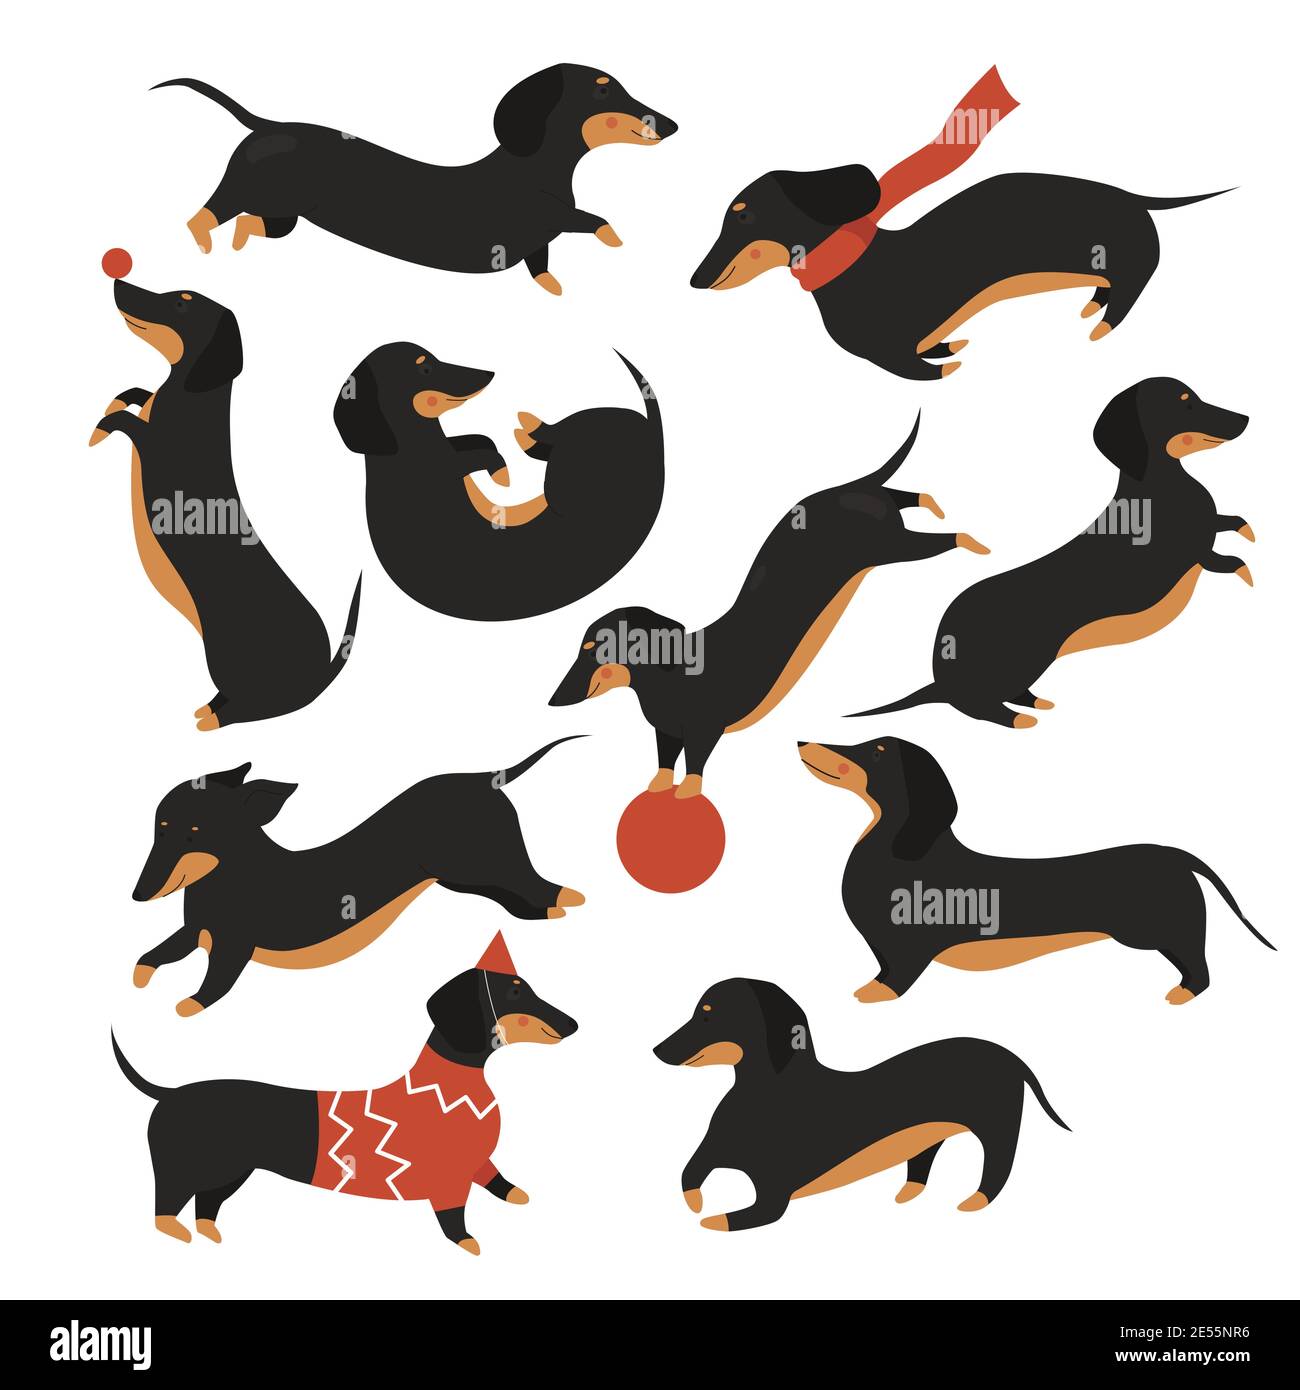 Dachshund dog vector illustration set. Cartoon cute pet animal in various poses collection, funny dachshund wearing sweater or scarf, happy puppy doggy playing with ball, jumping isolated on white Stock Vector